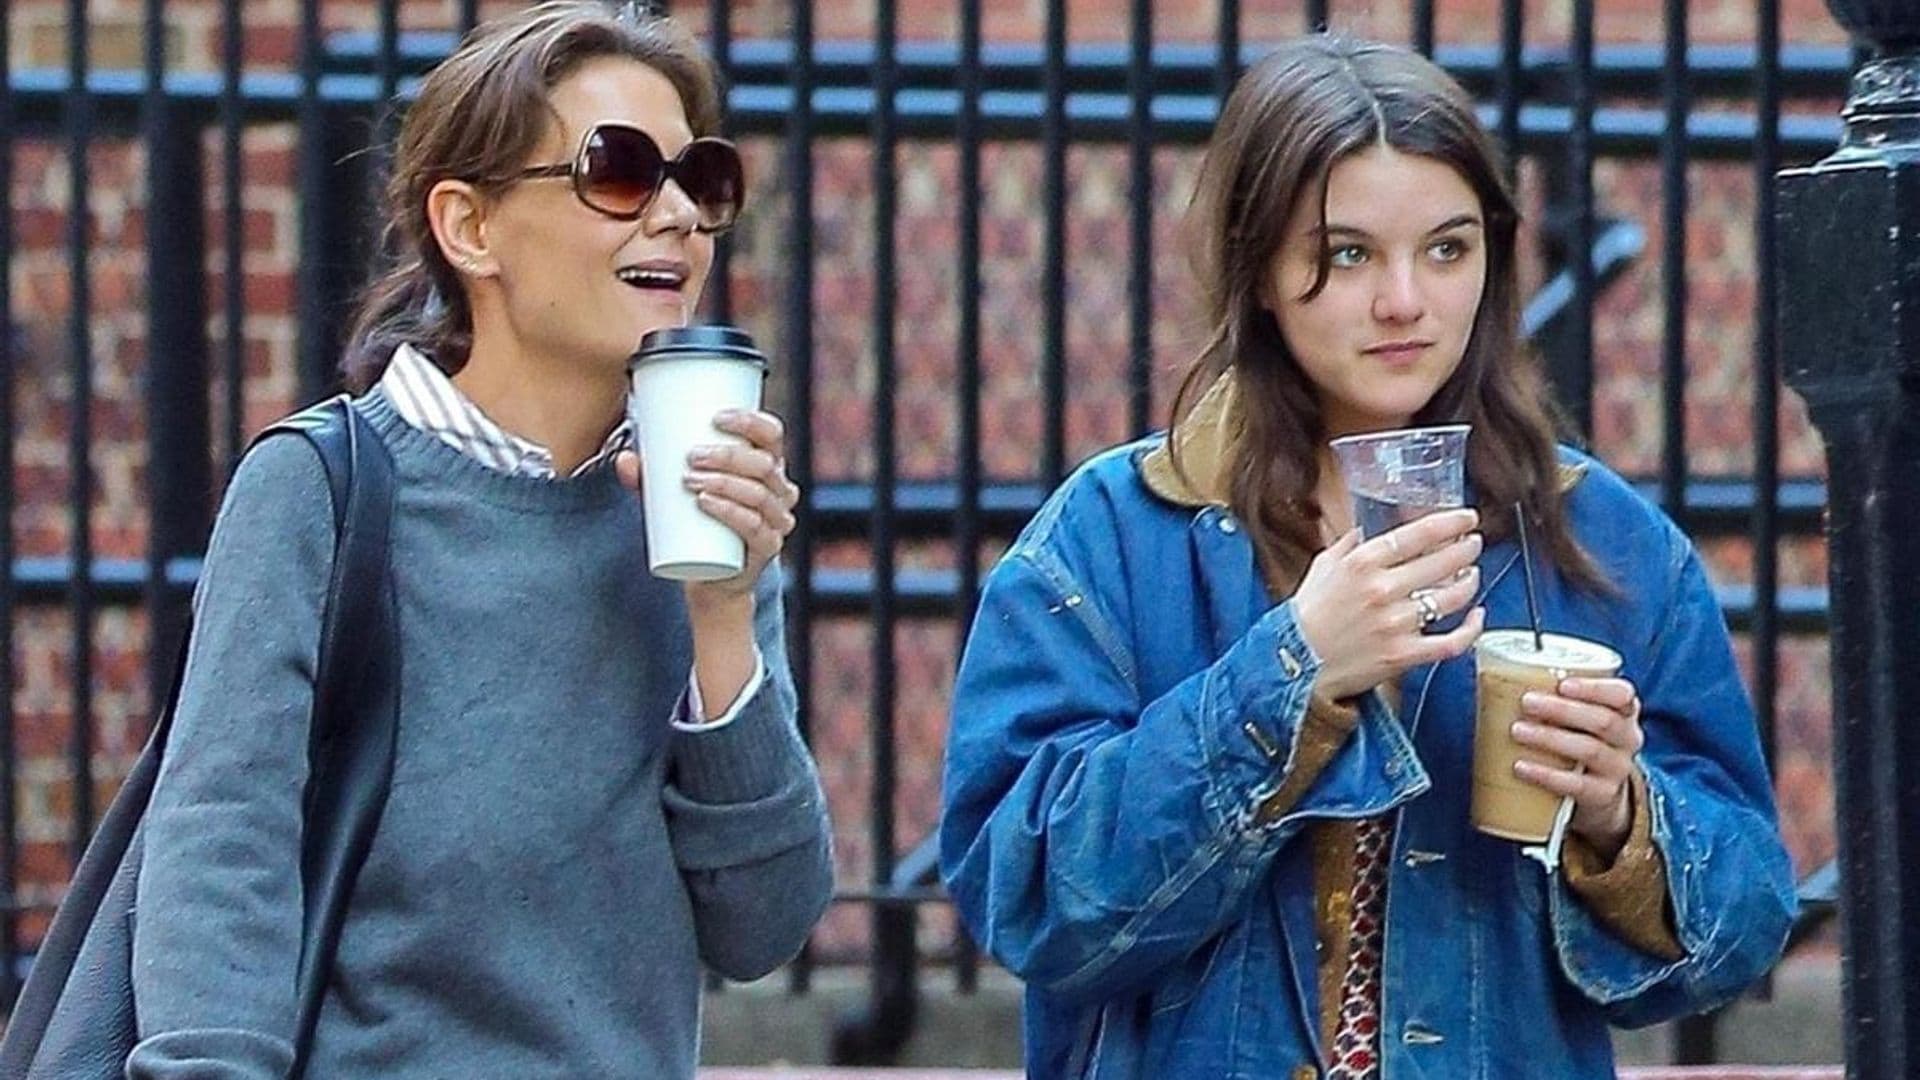 Suri Cruise and Katie Holmes look like sisters on a fashionable coffee date